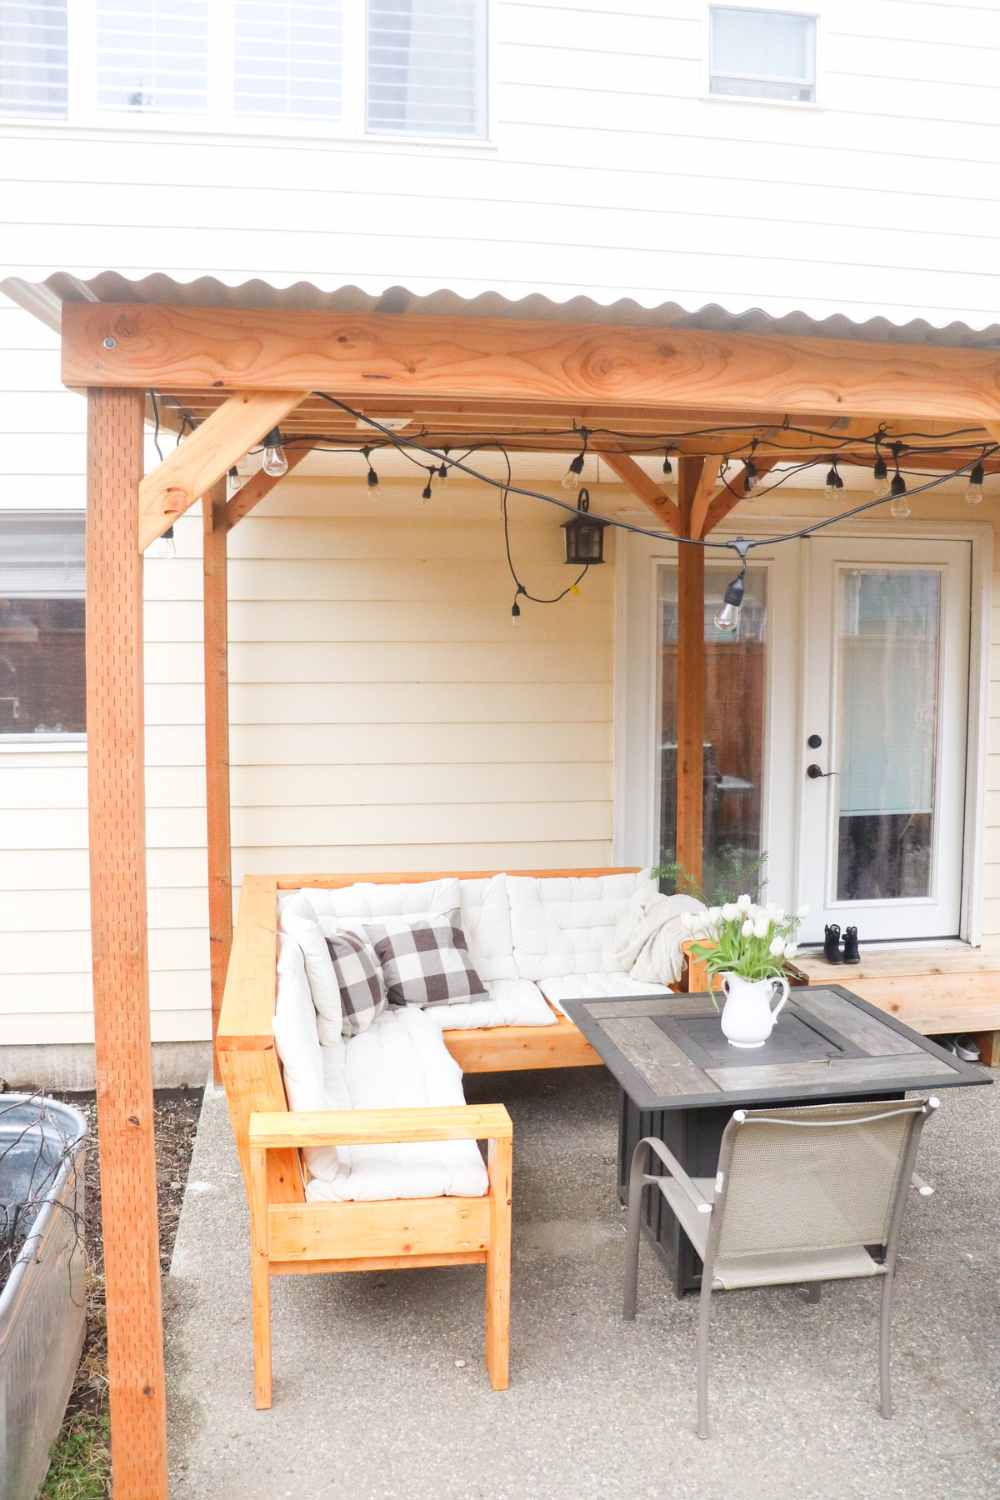 DIY free standing patio cover